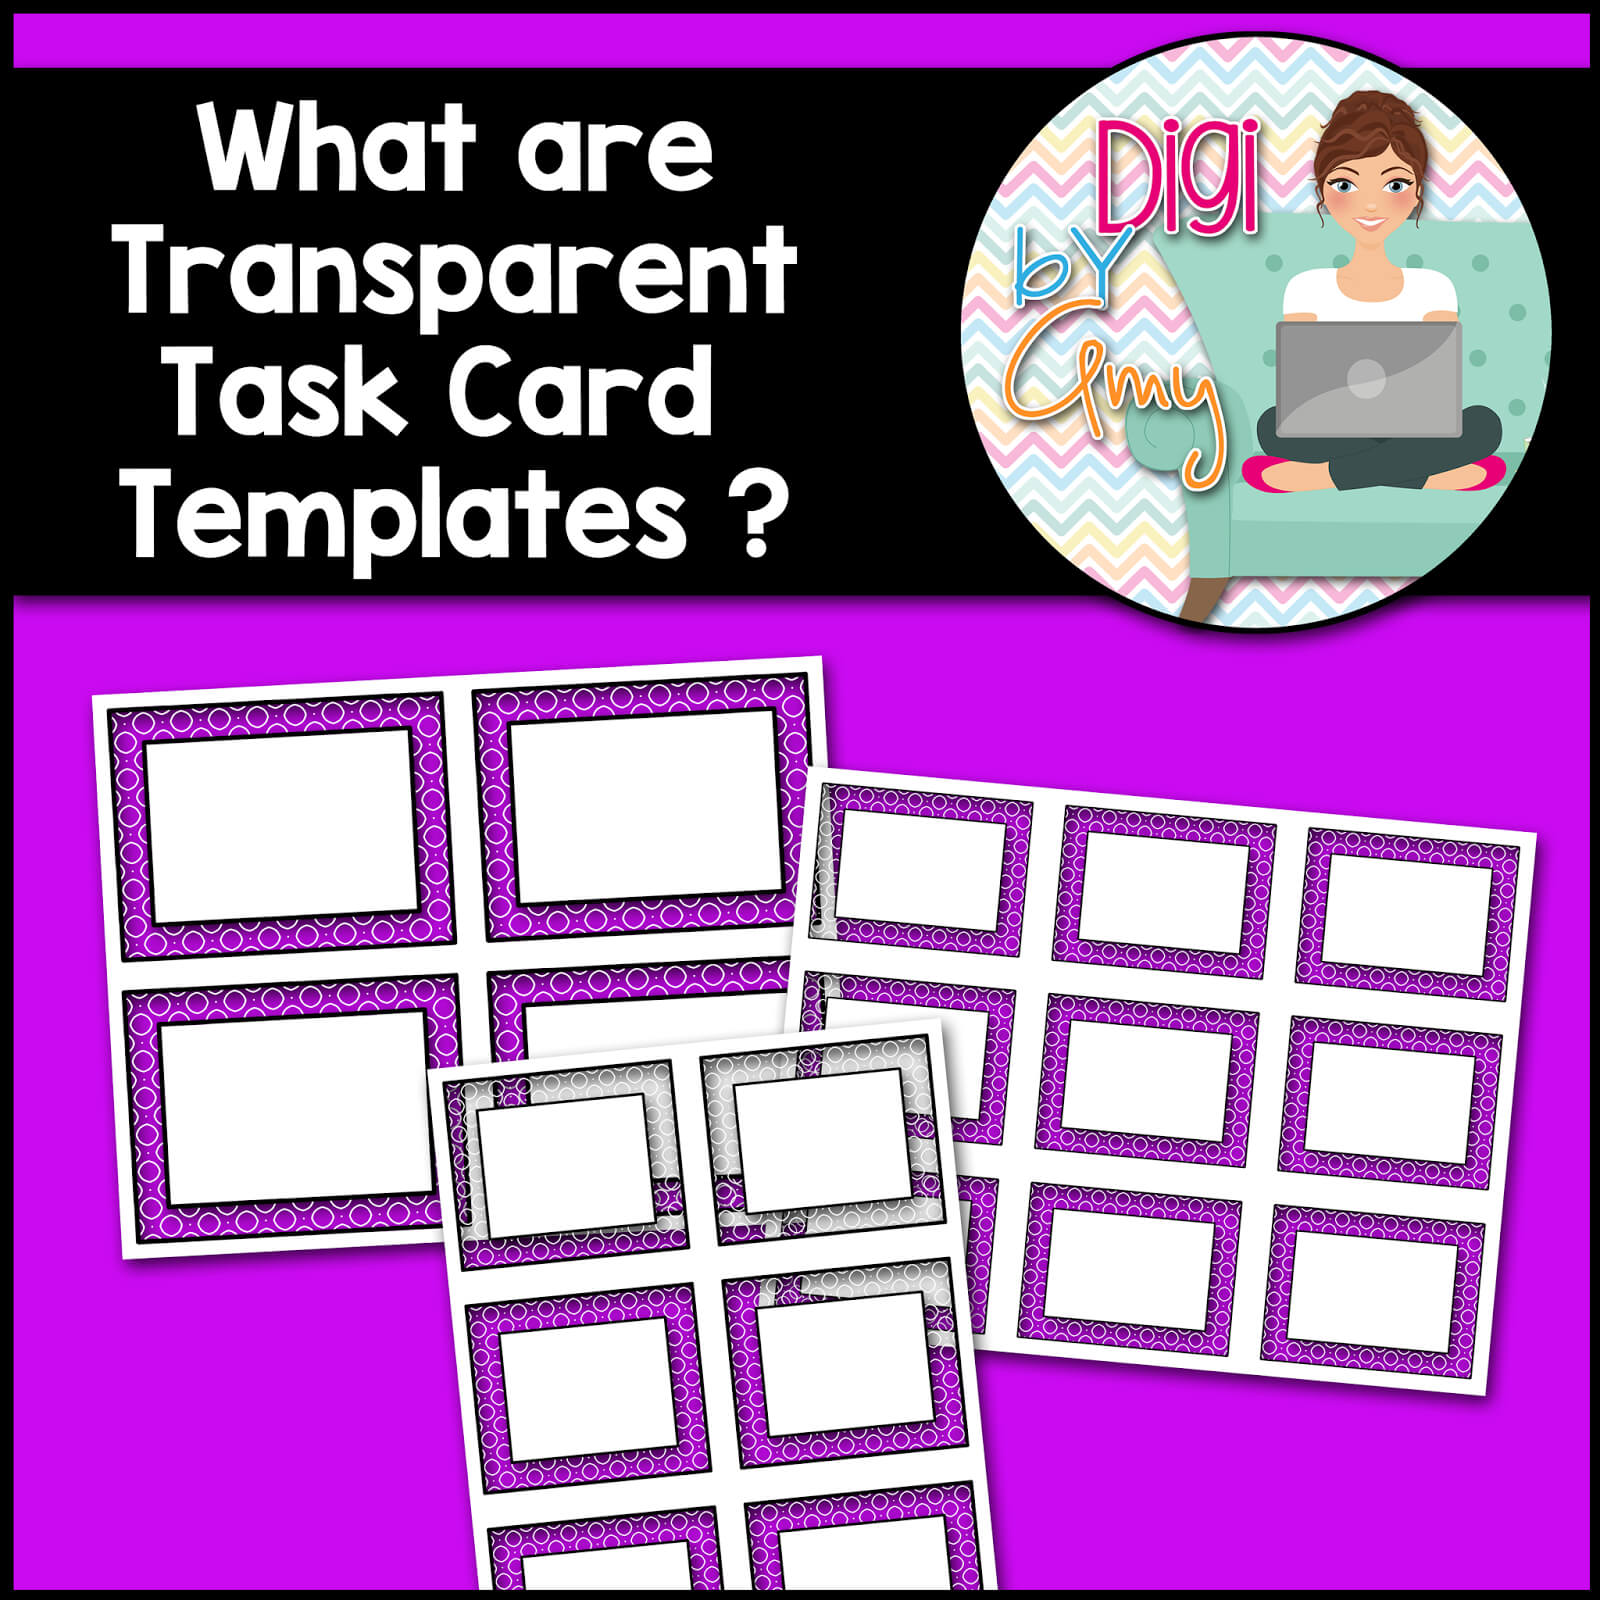 Digiamy: What Are Transparent Task Card Templates? In Task Card Template